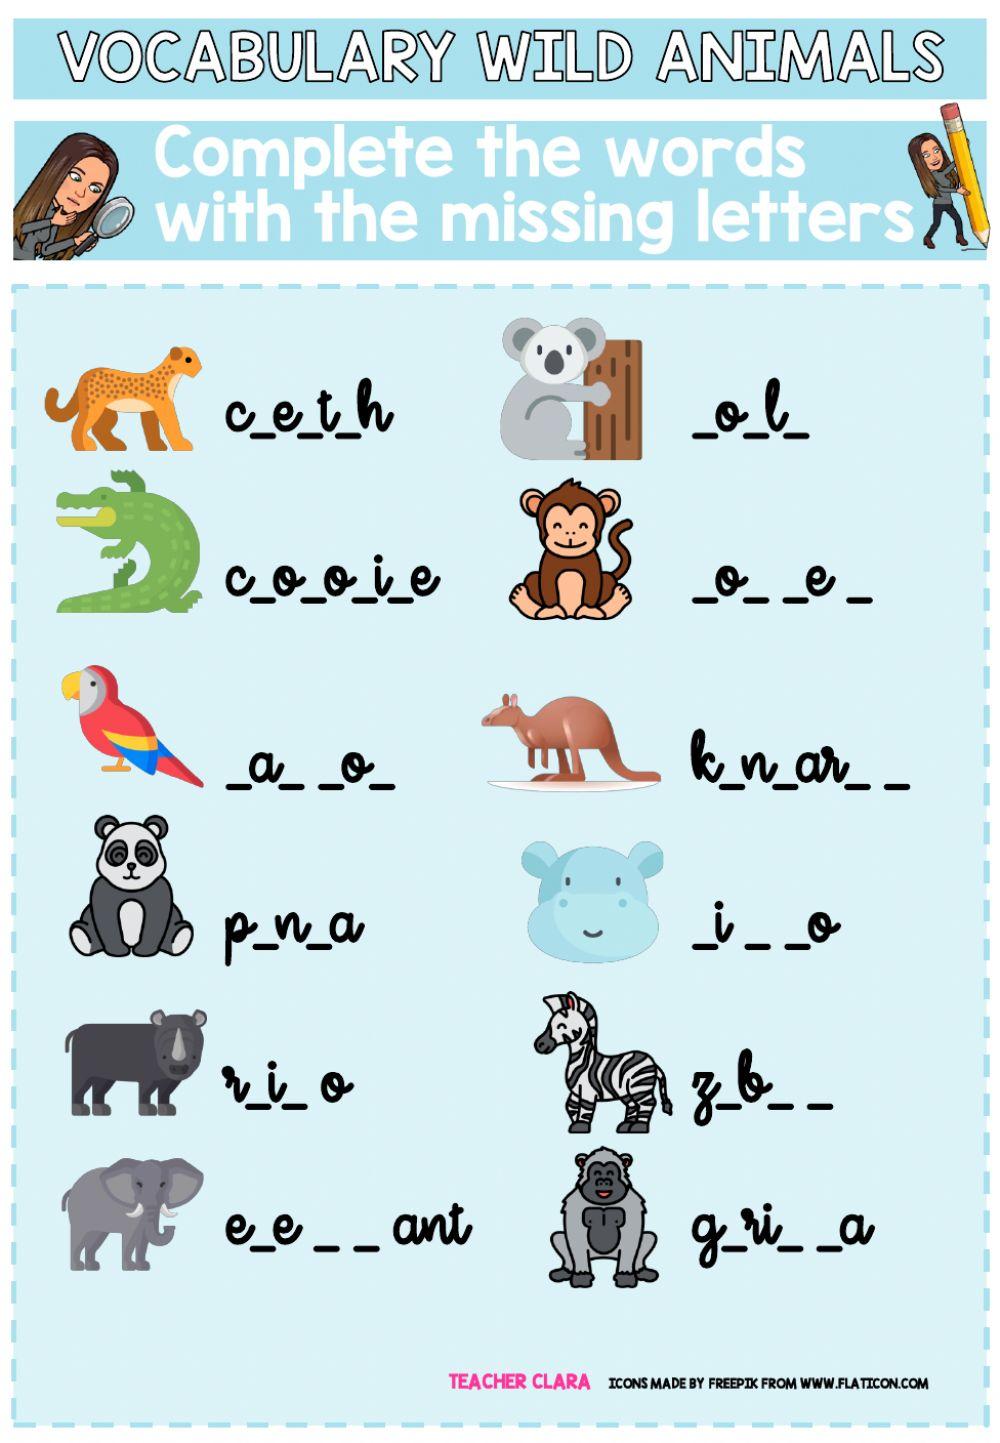 Wild animals missing letters